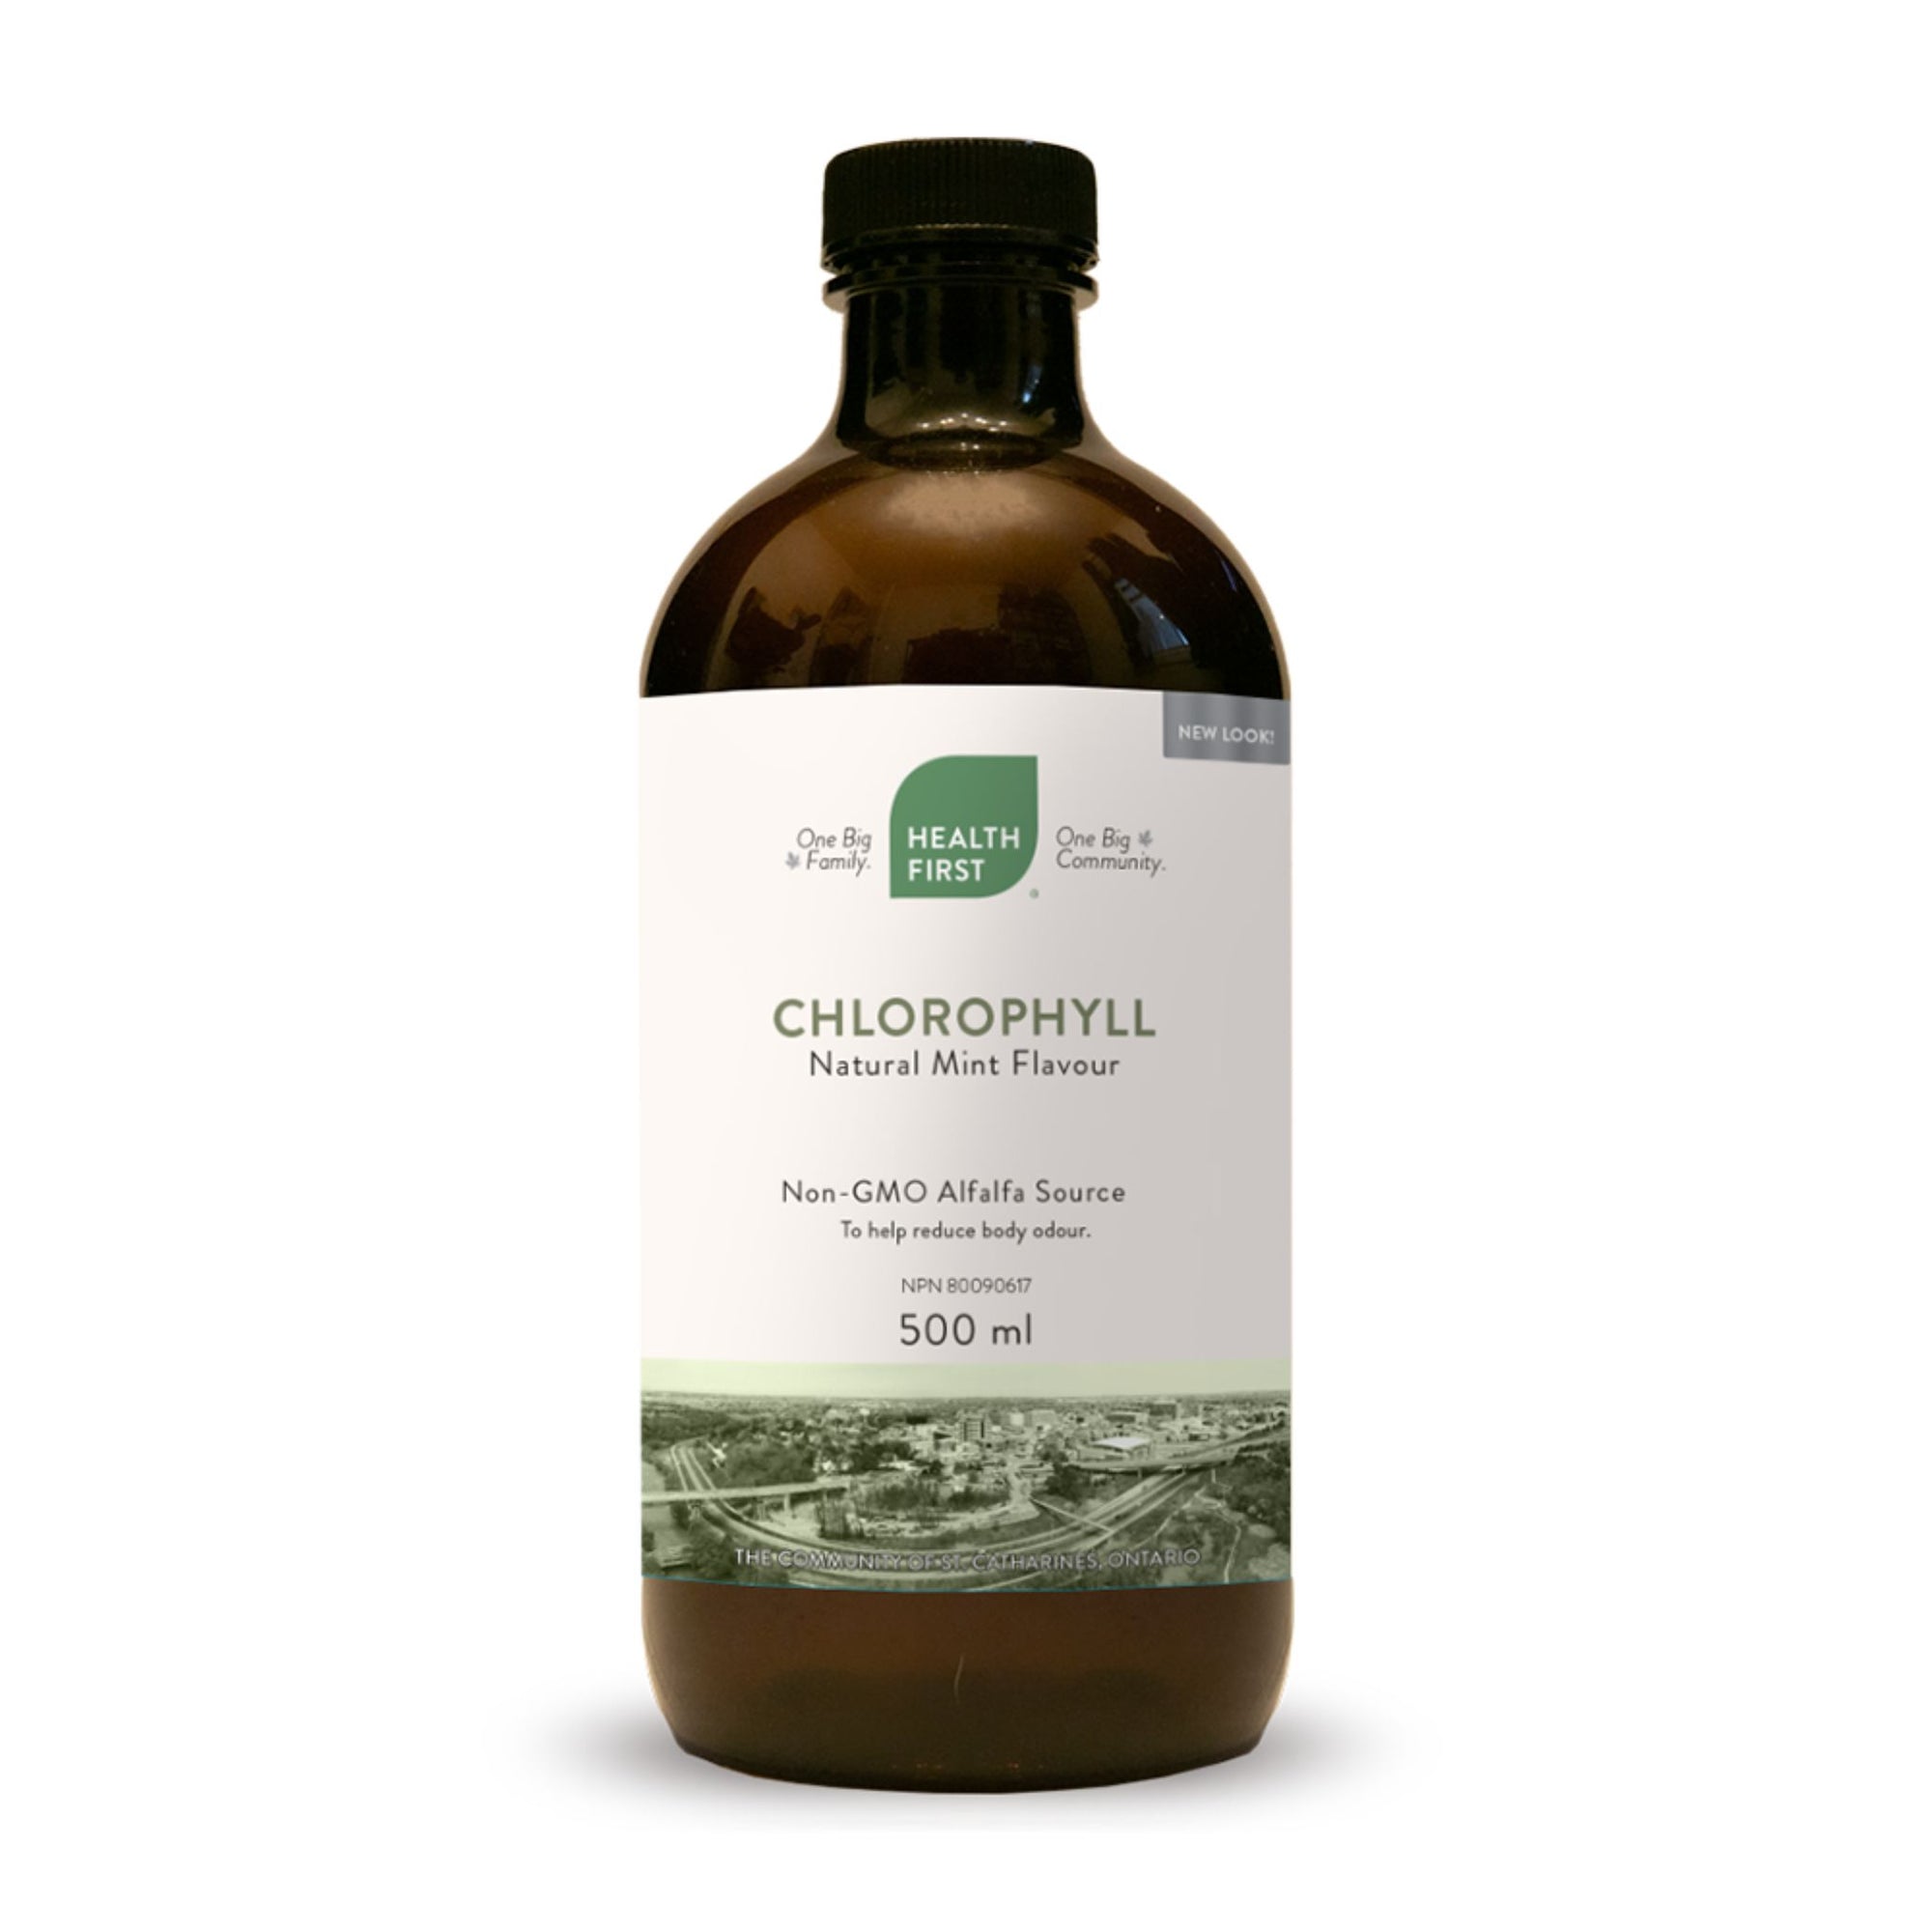 Health First Liquid Chlorophyll Natural Mint Flavour 500ml - a supplement commonly used as an internal deodorant